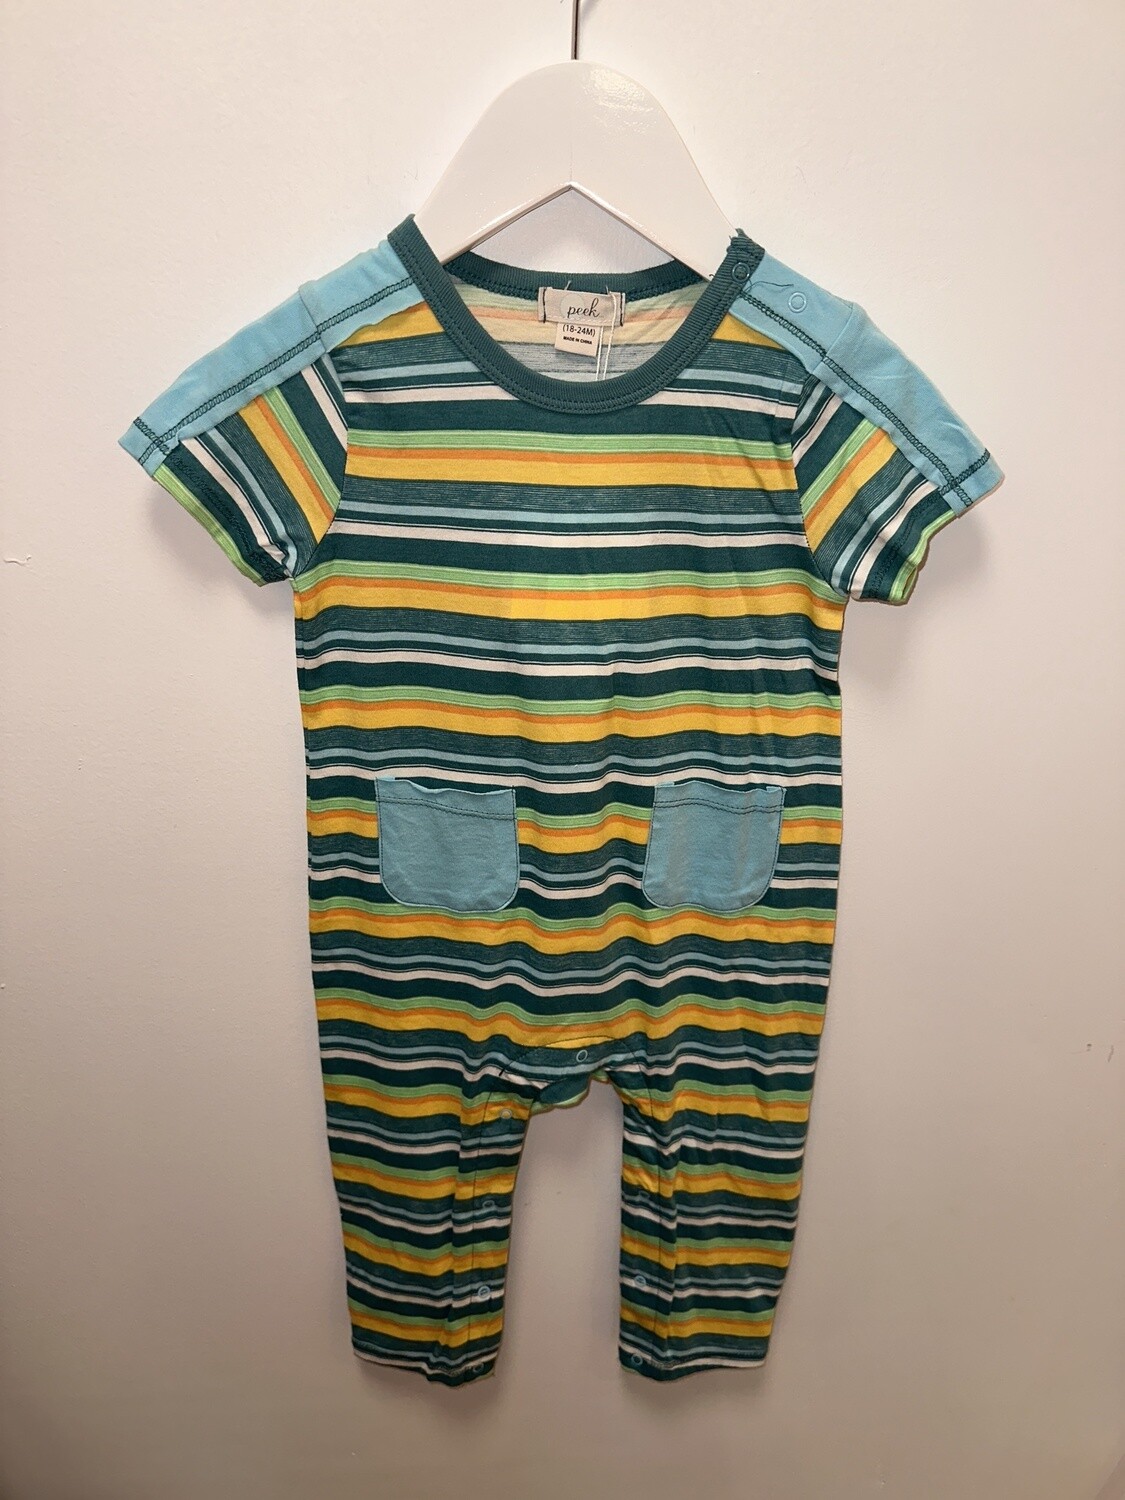 New with Tags - Peek Kids - Rompers - 18-24 Months - PWE278